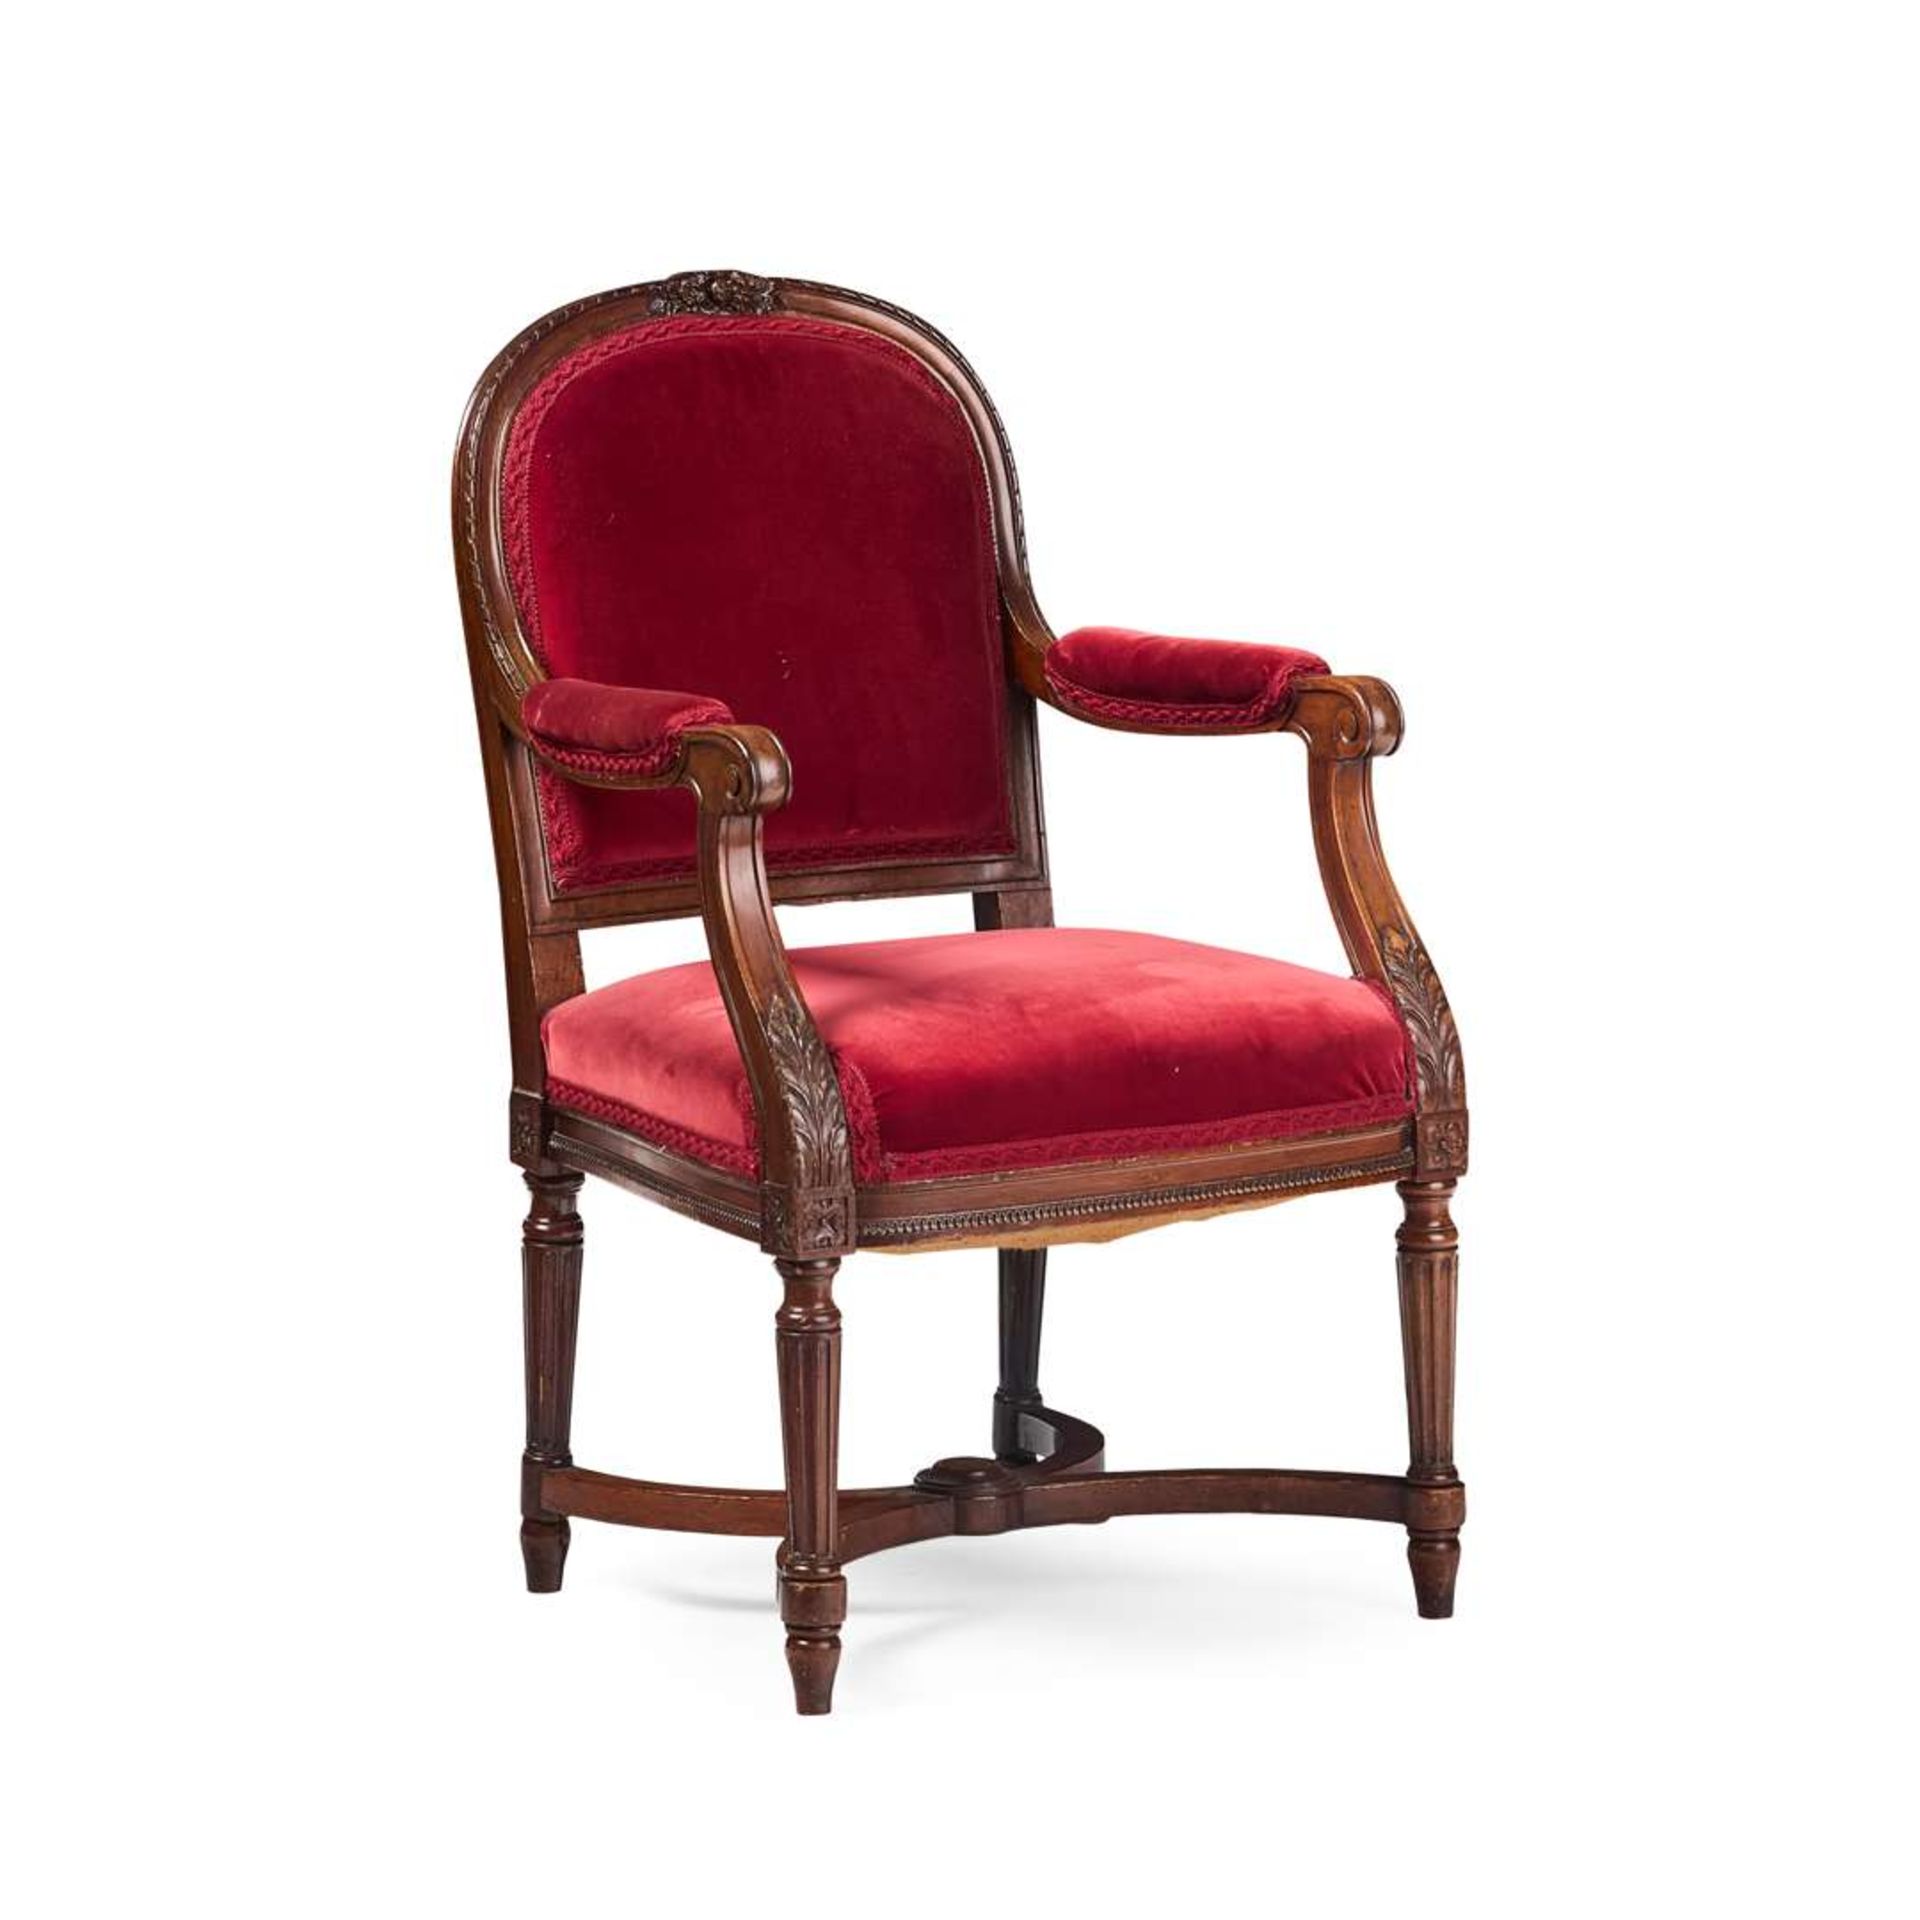 LOUIS XVI STYLE ARMCHAIR FROM THE CUNARD LINES R.M.S. BERENGARIA, BY CHARLES-FRÉDÉRIC MEWÈS